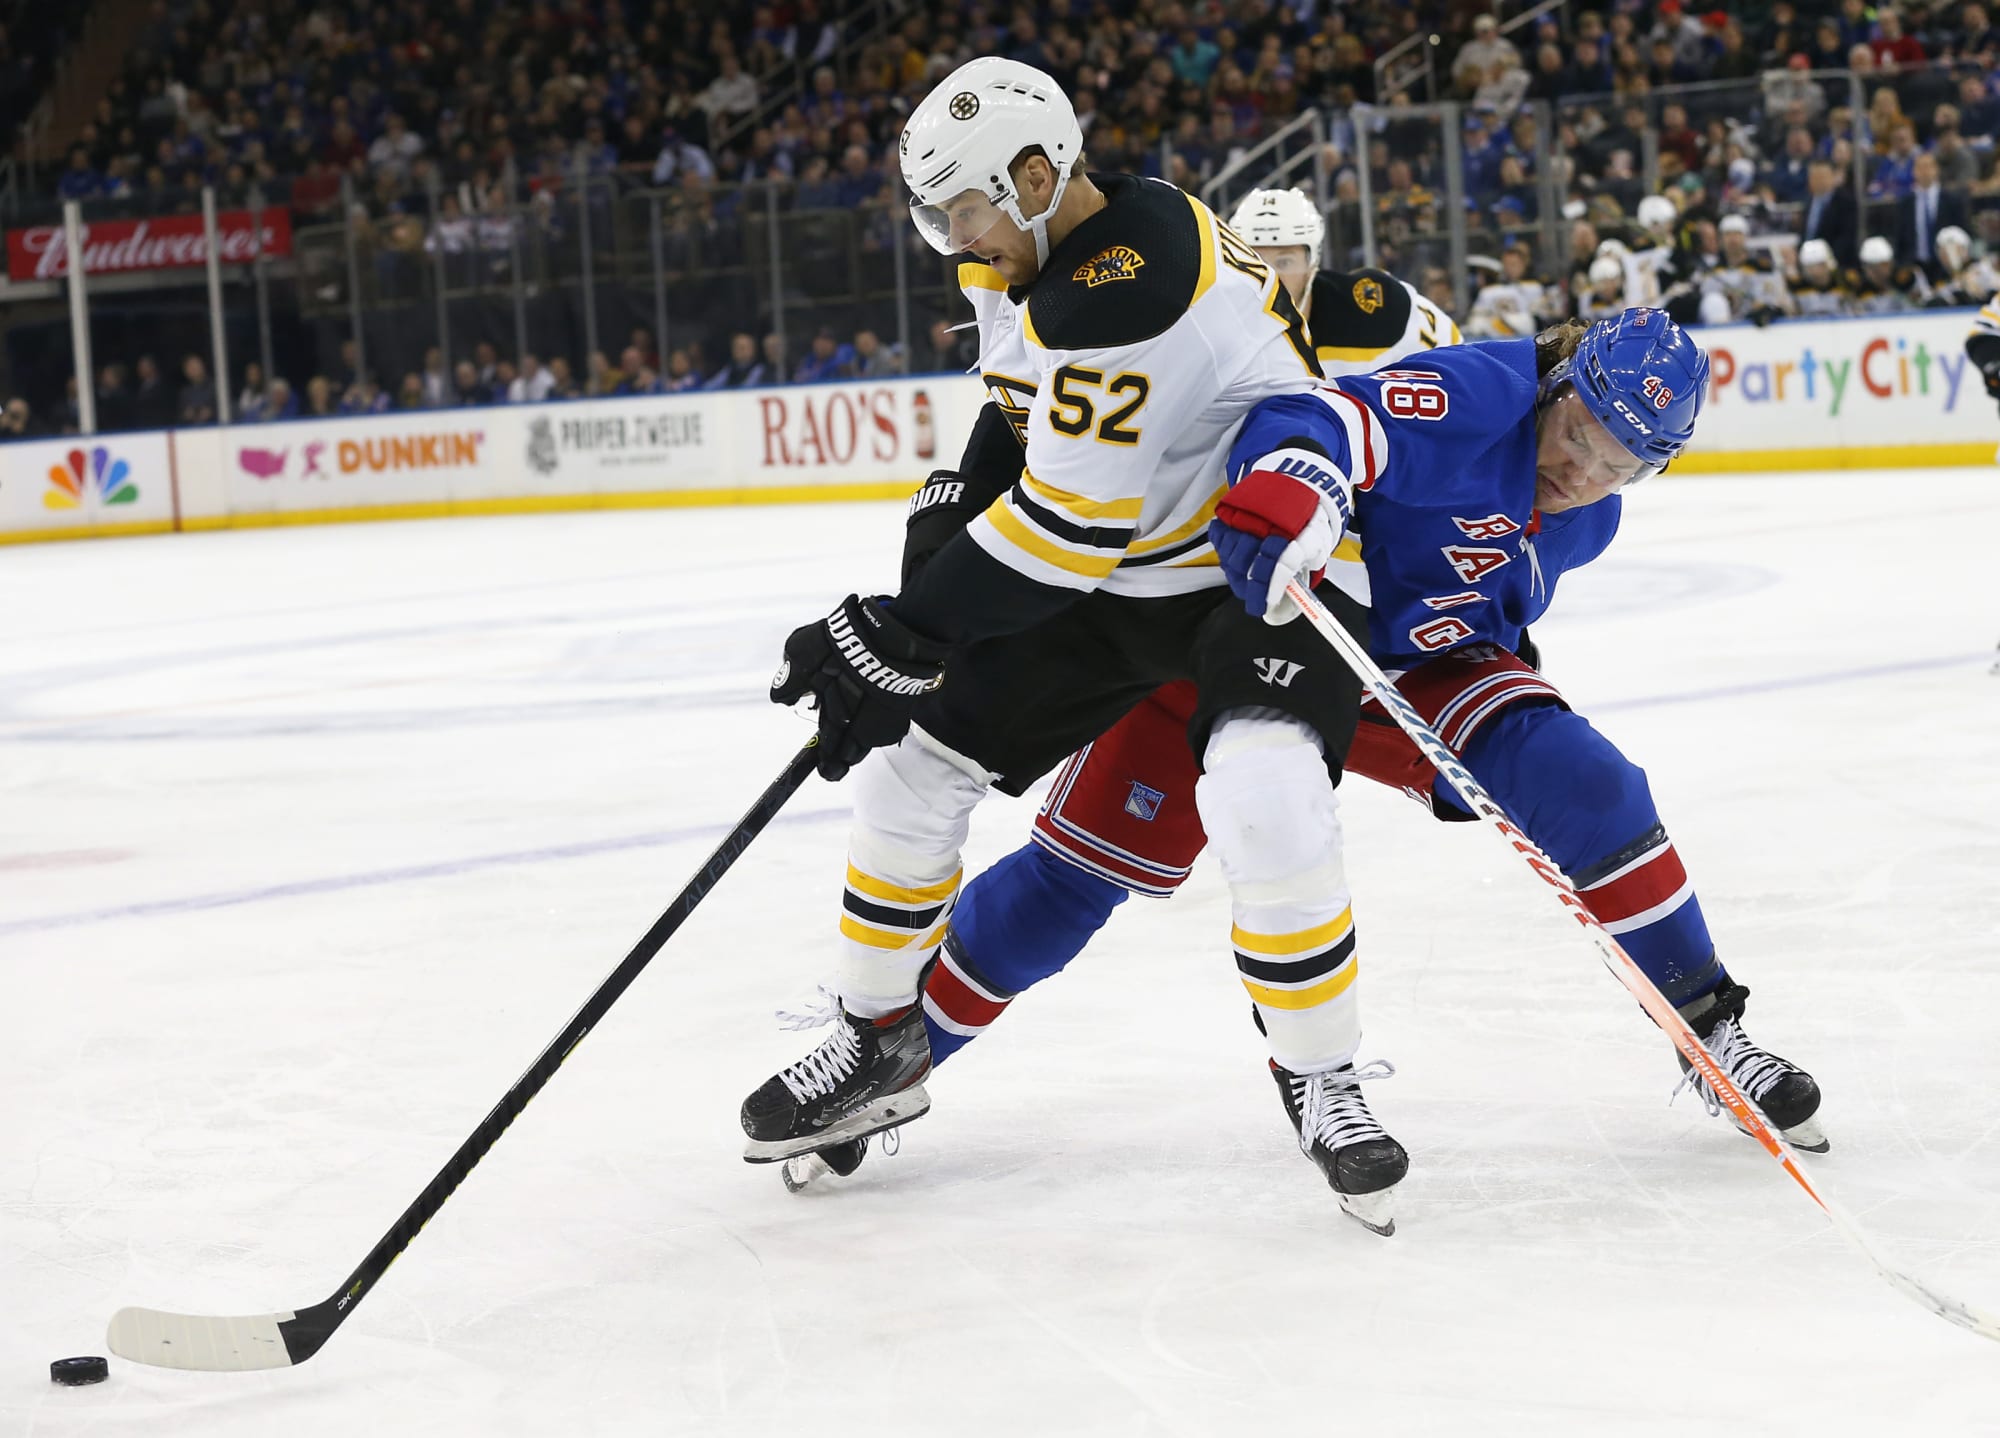 Bruins at Rangers 2/10/21 Game preview, lineups, and more